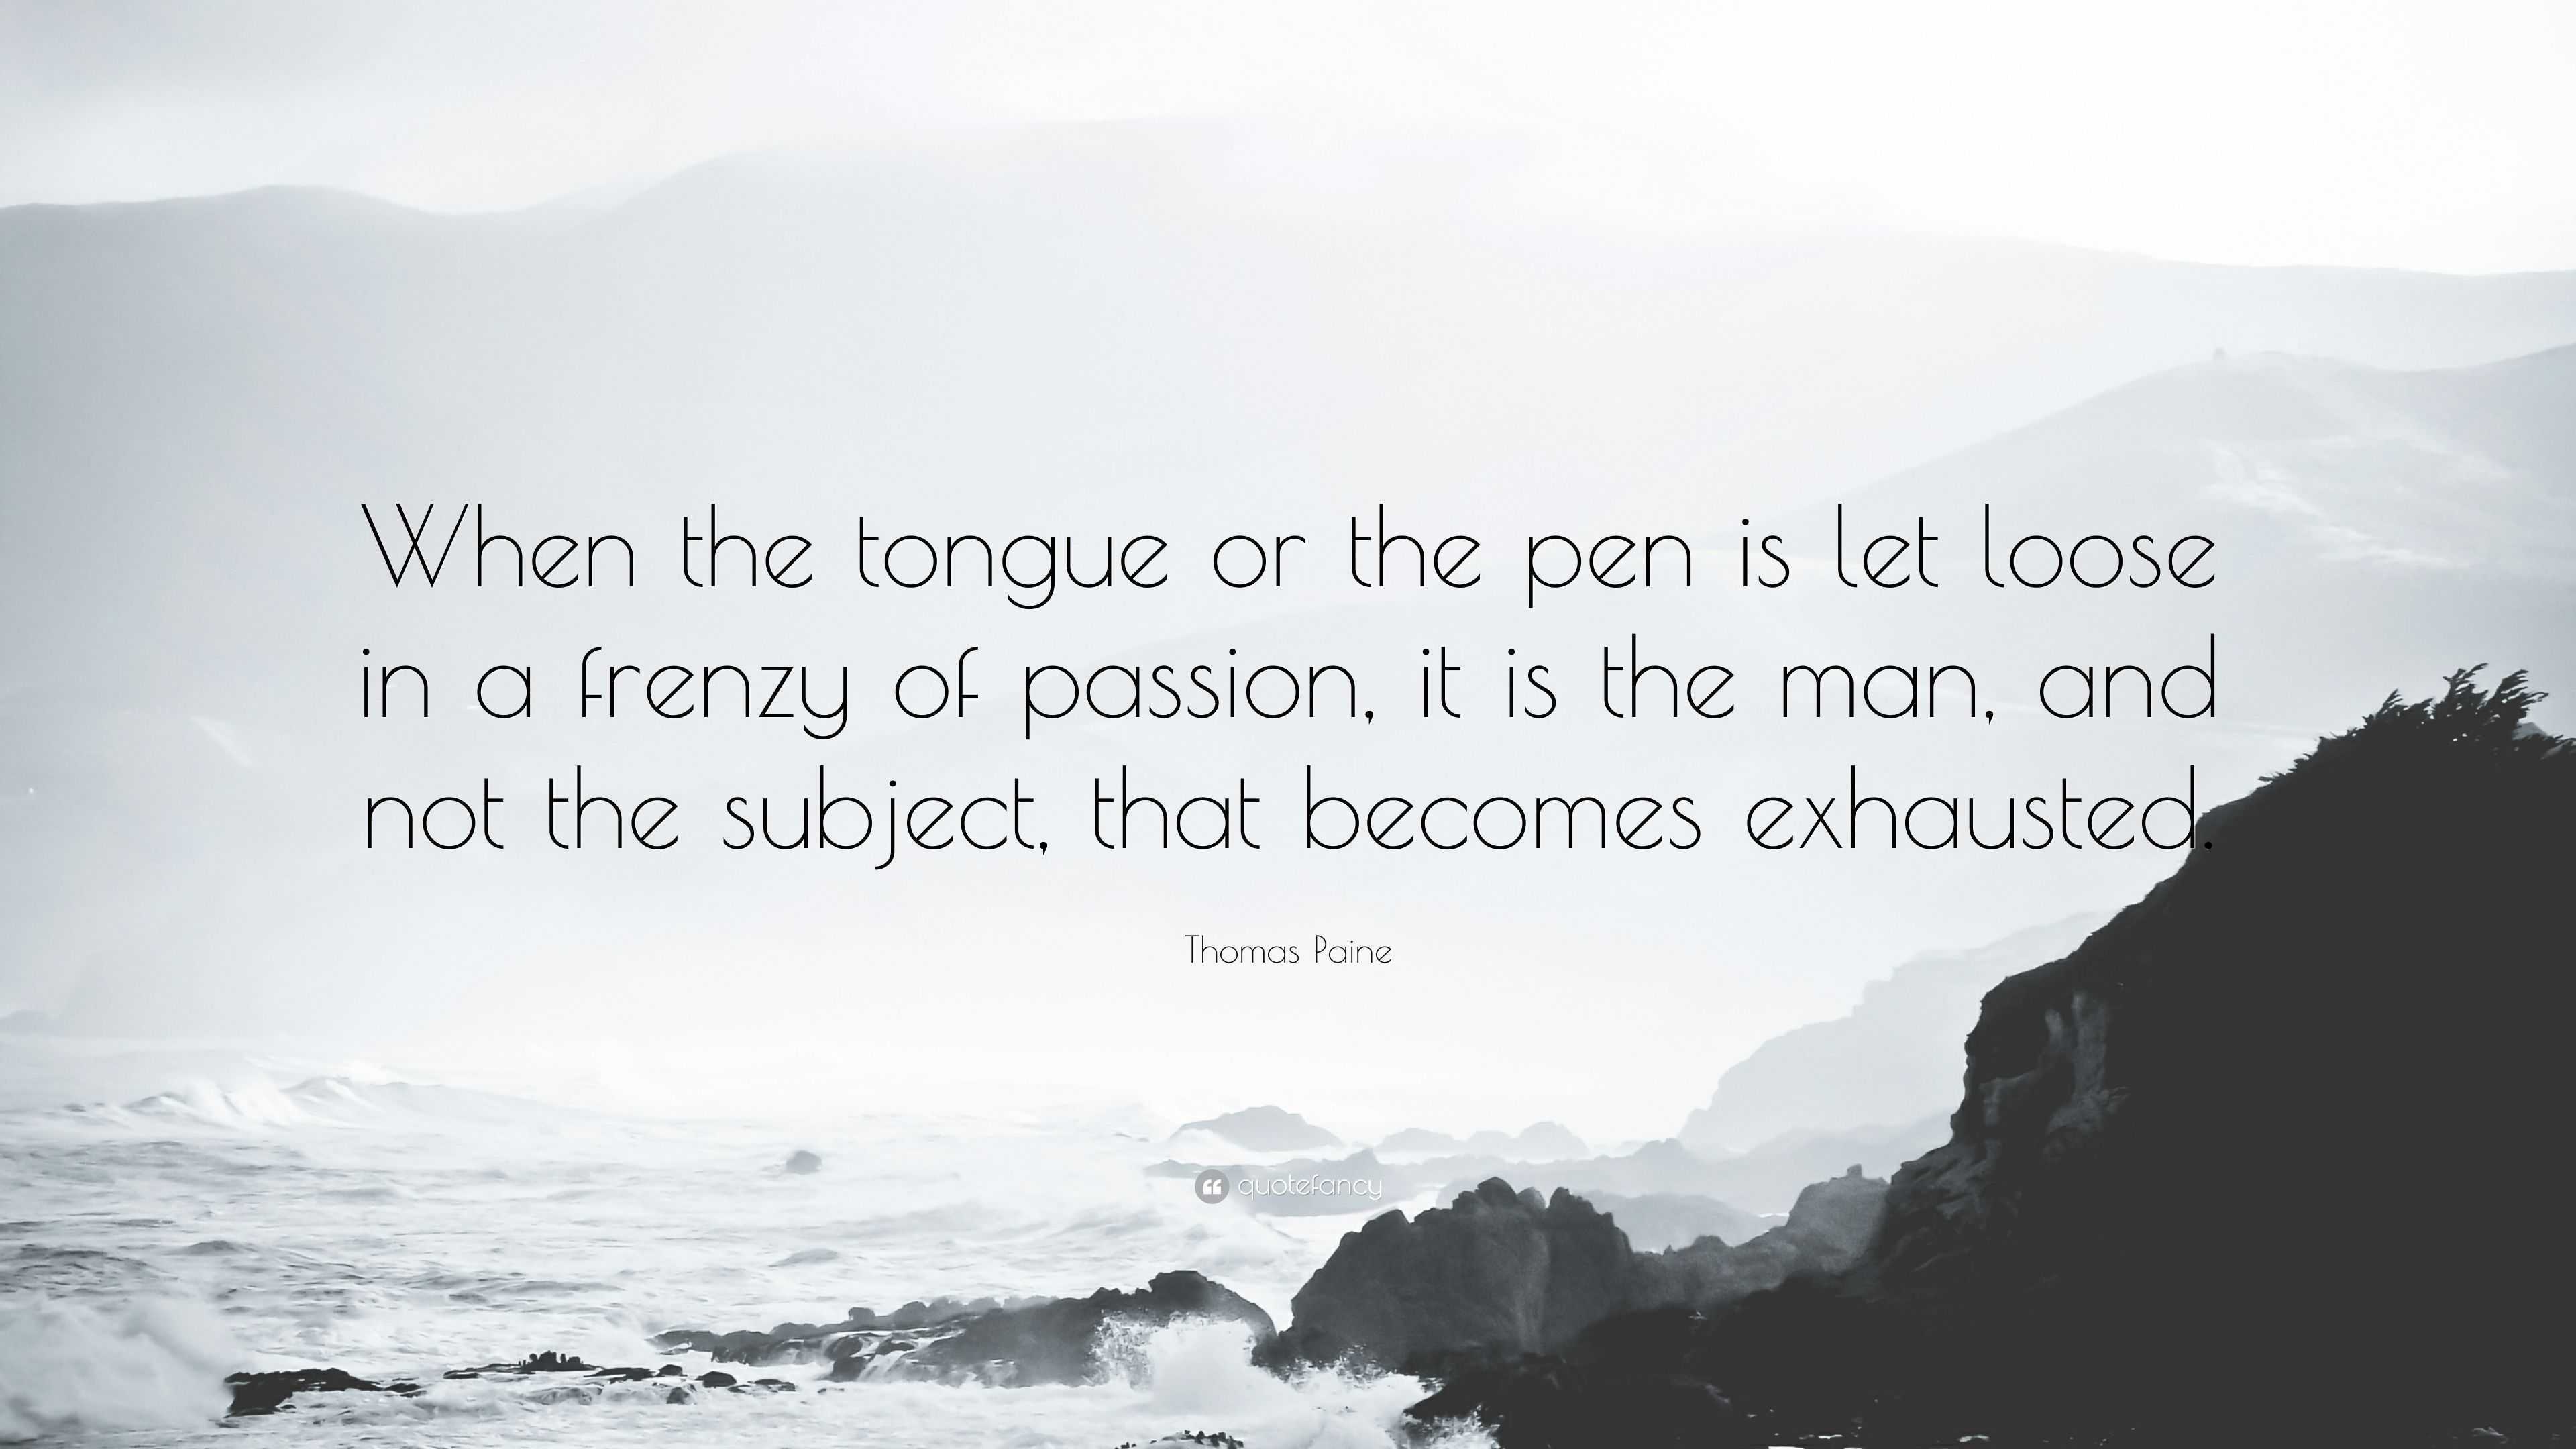 Passions of the Tongue